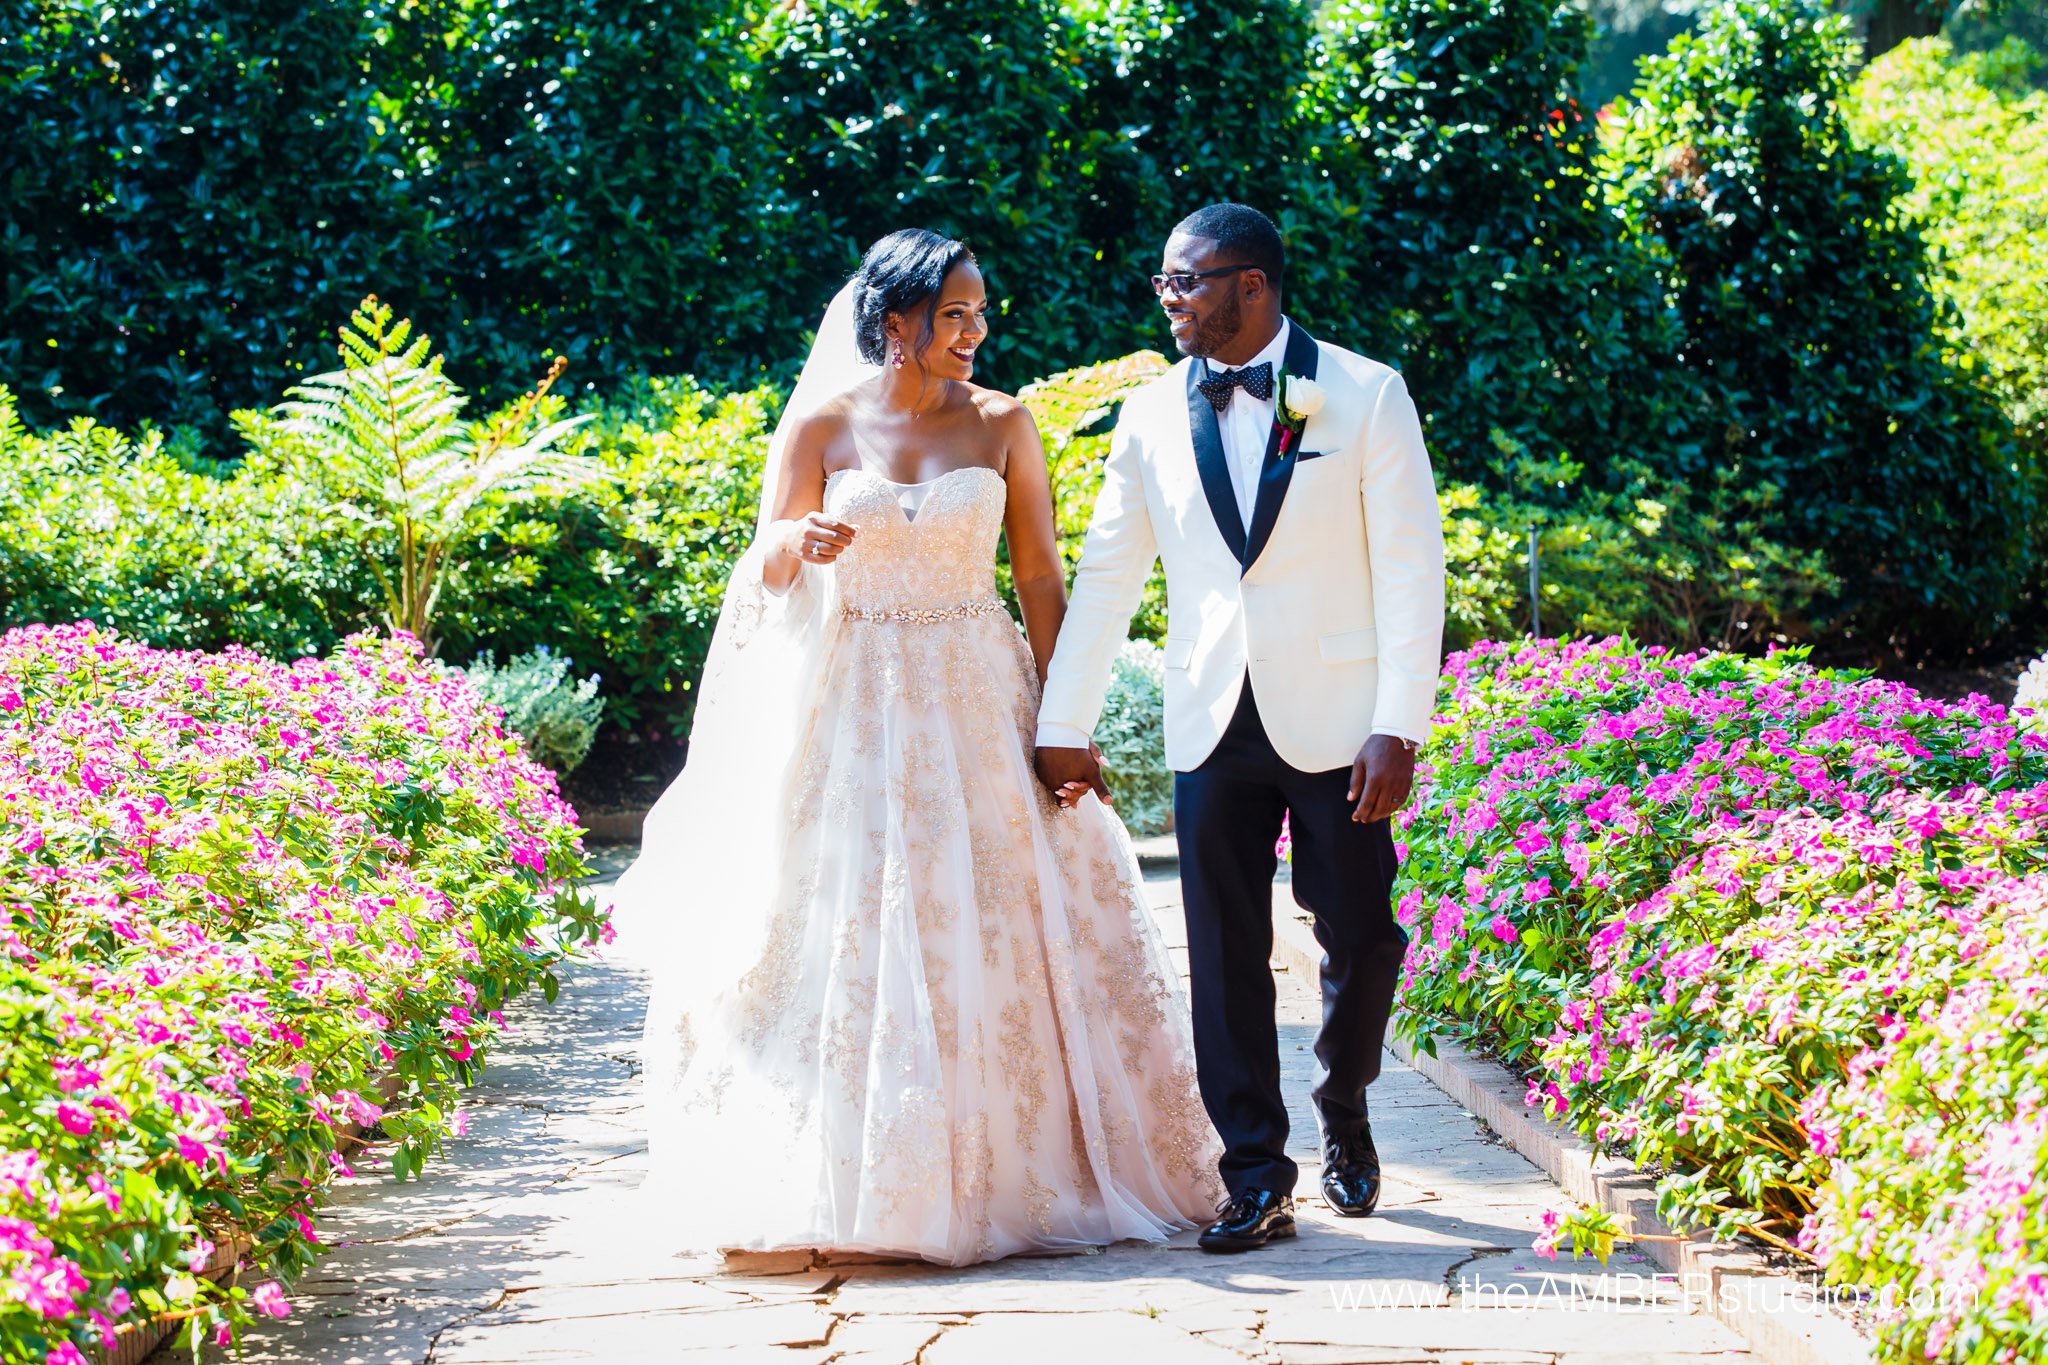 African American bride & groom at the Dallas Arboretum & Botanical Garden. It is sunny, and they are holding hands and walking in the garden on their wedding day.